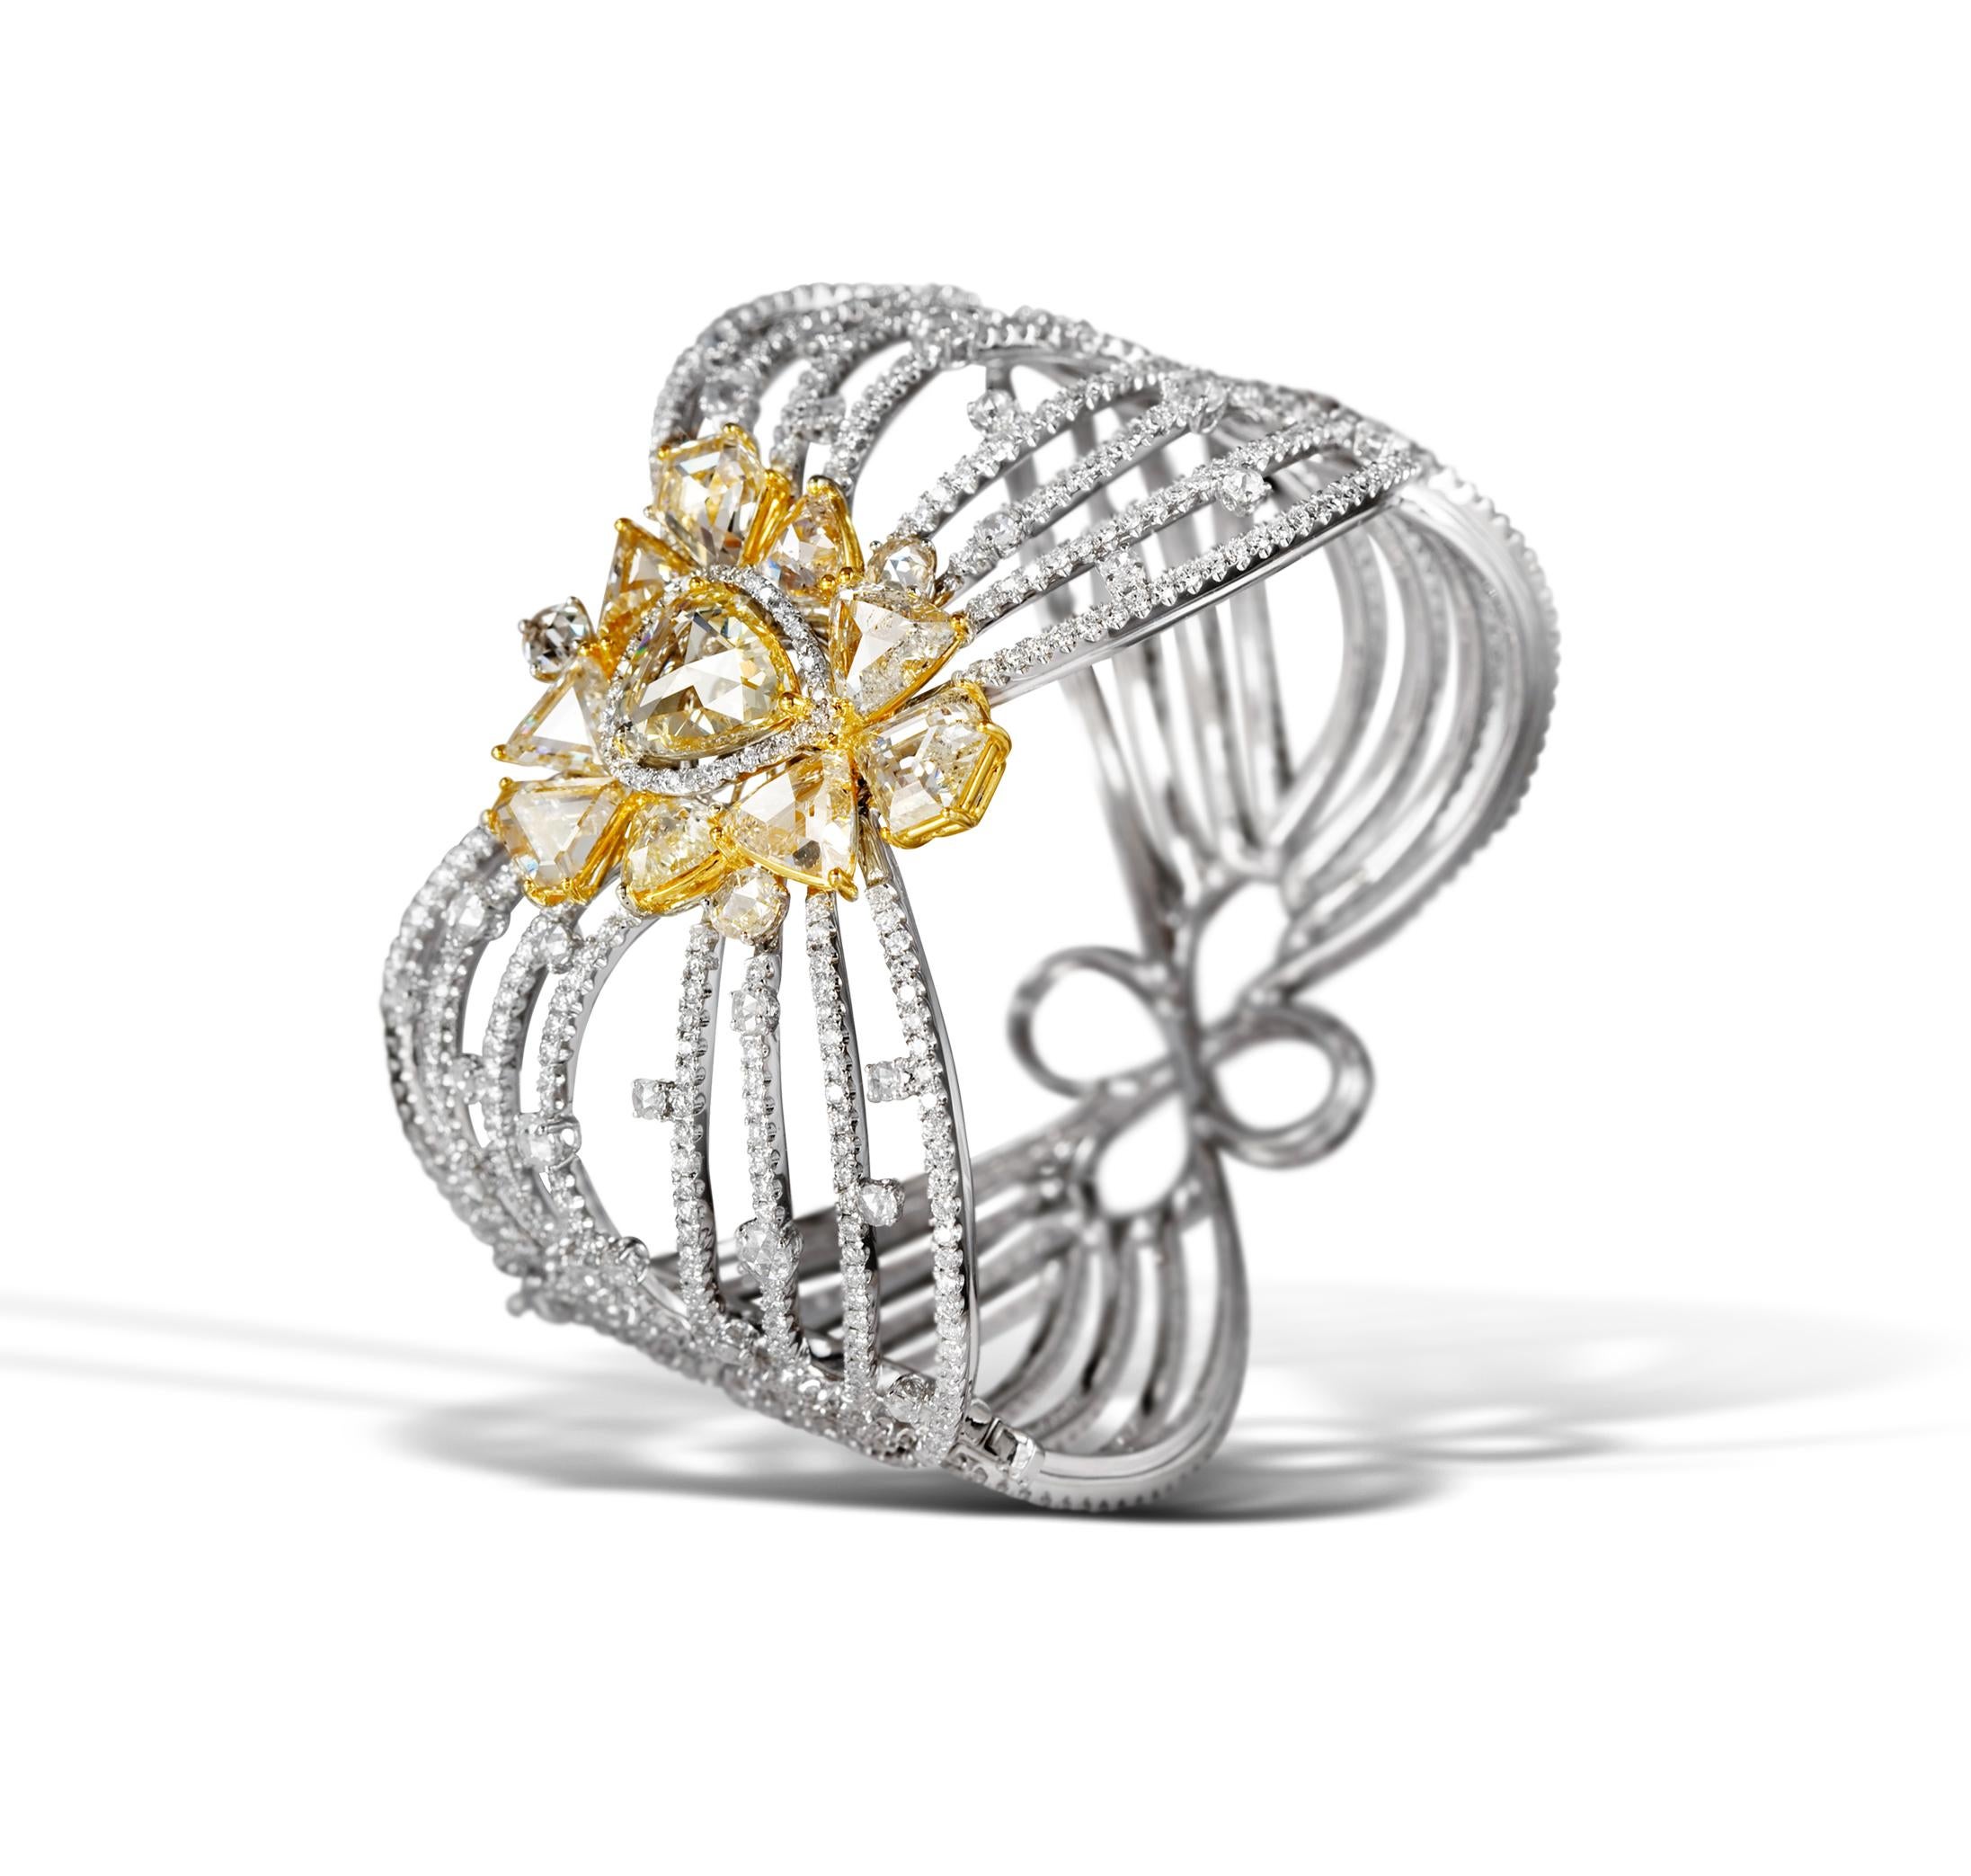 From our award winning COUTURE line. Designed by Samir Bhansali, this one of a kind convertible bangle features a beautiful combination of brilliant cut  diamonds (10.19cts) ,  yellow rose cut diamonds (10.33cts),  white  rose cut diamonds (2.29cts)